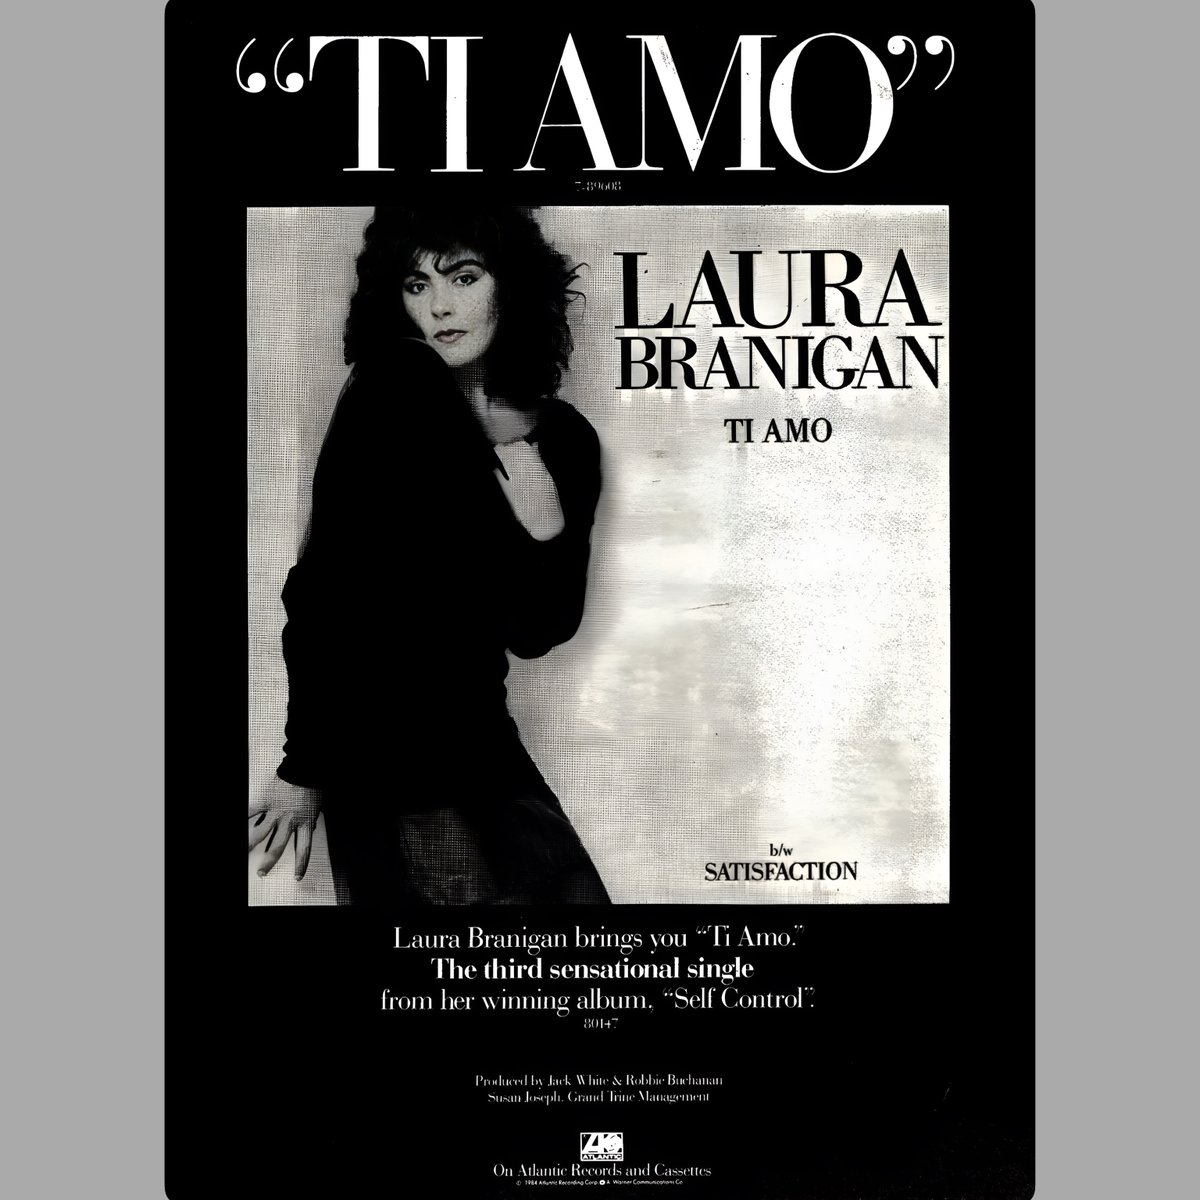 #ThrowbackThursday #MusicAdvertising October 26, 1984 - R&R ('Radio & Records') trade magazine published a full-page promo ad for Laura's 'Ti Amo' single from her SELF CONTROL album (1984). ~ Kathy Golik, Legacy Manager
#LauraBranigan #TiAmo #Single #SelfControl #RadioAndRecords